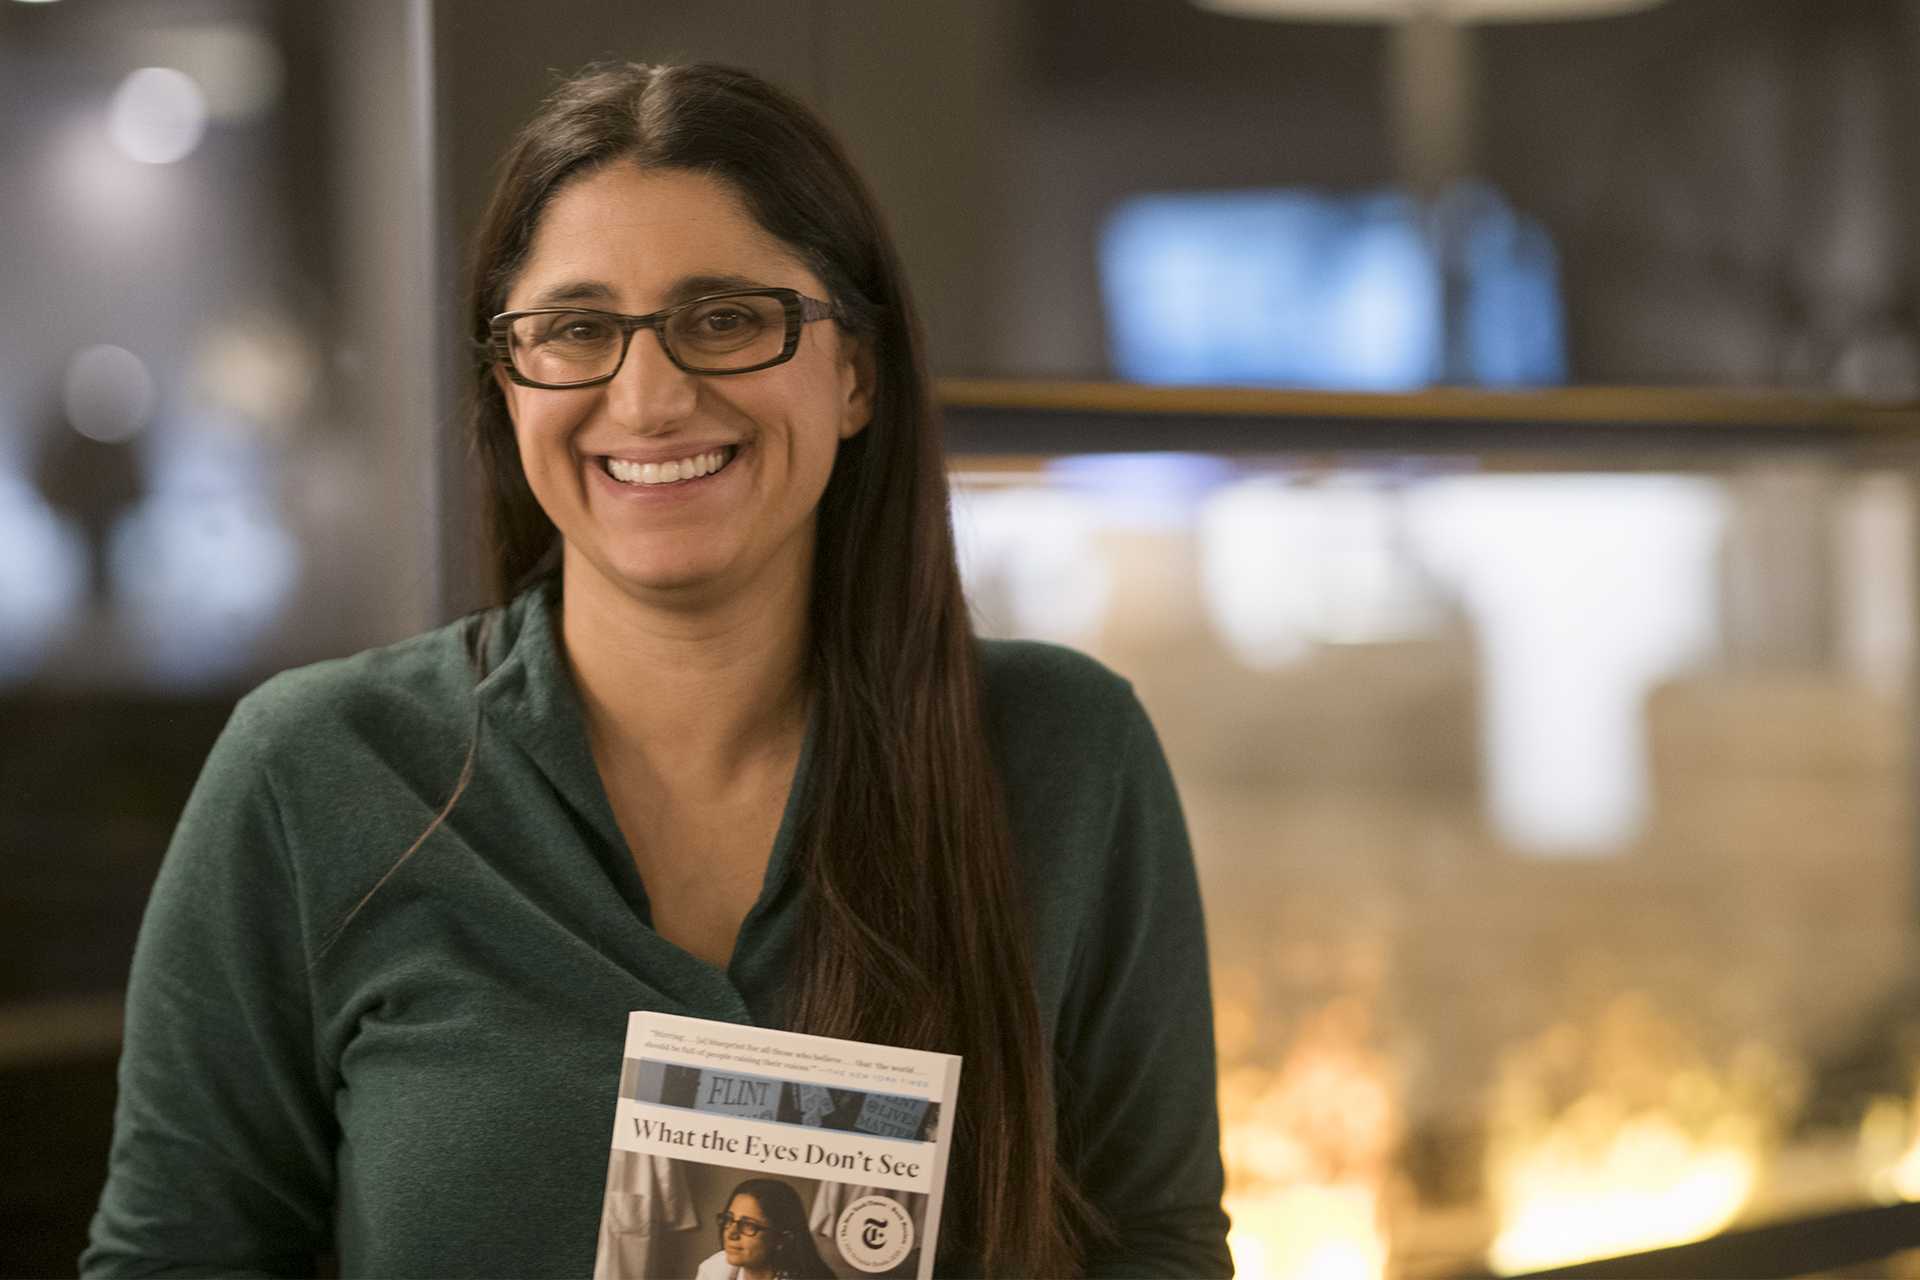 Dr. Mona Hanna-Attisha brings Flint water crisis to Fort Collins - Rocky Mountain Collegian